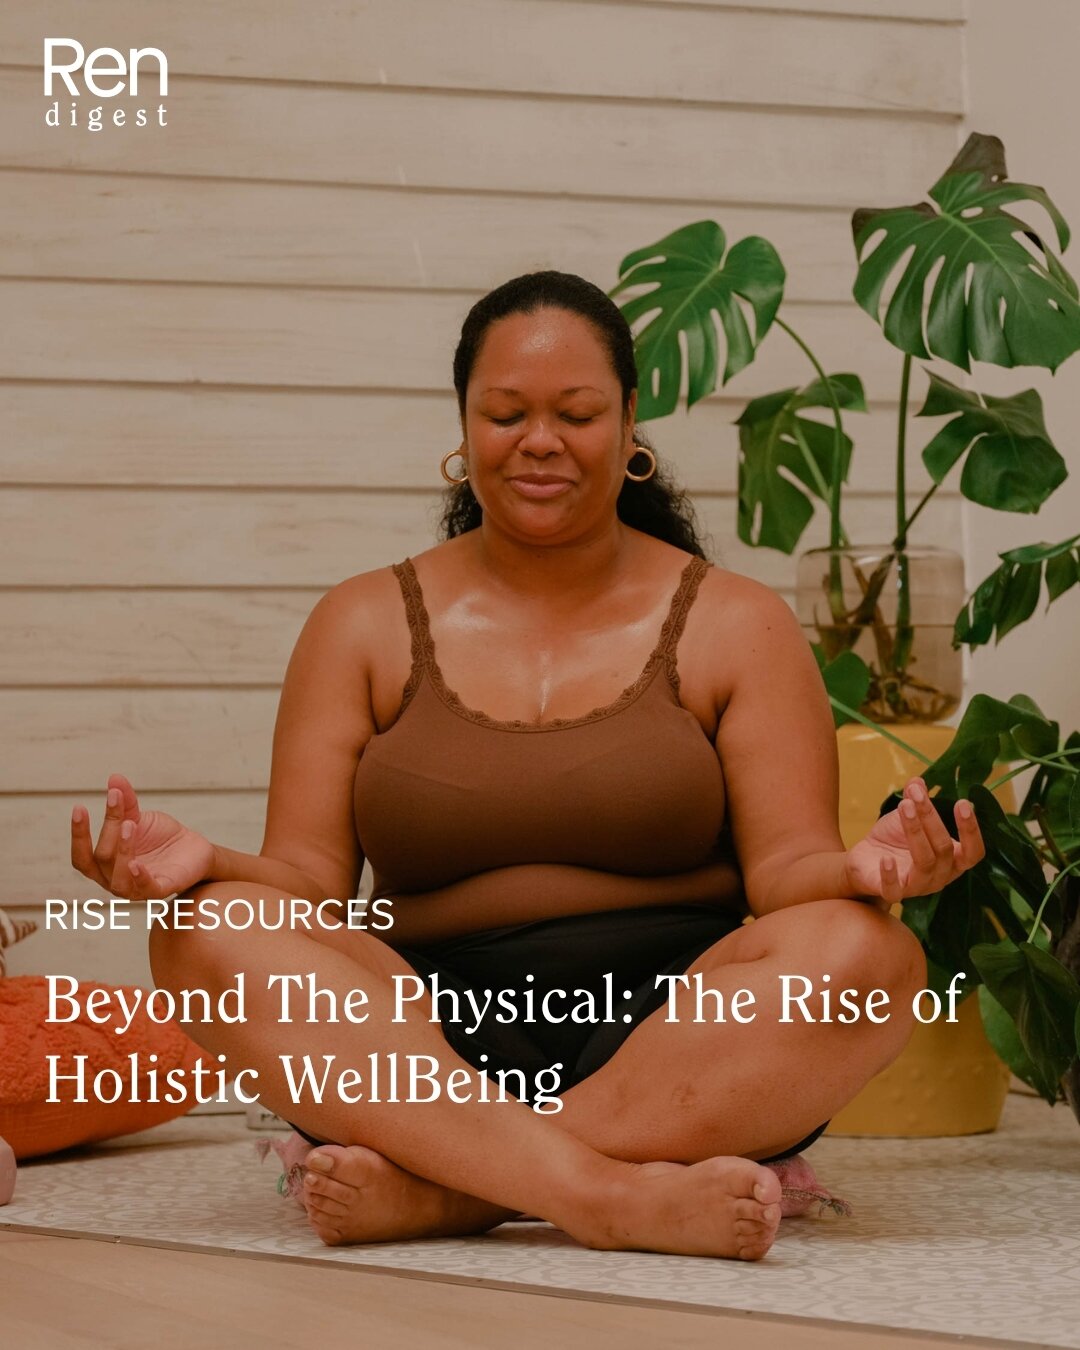 The wellness industry is shifting. 

As people awaken and evolve, a new paradigm is emerging&mdash;a wellness industry that goes way beyond prioritizing the physical body above all else. 

In the latest Ren Digest article, we explore the nuanced diff